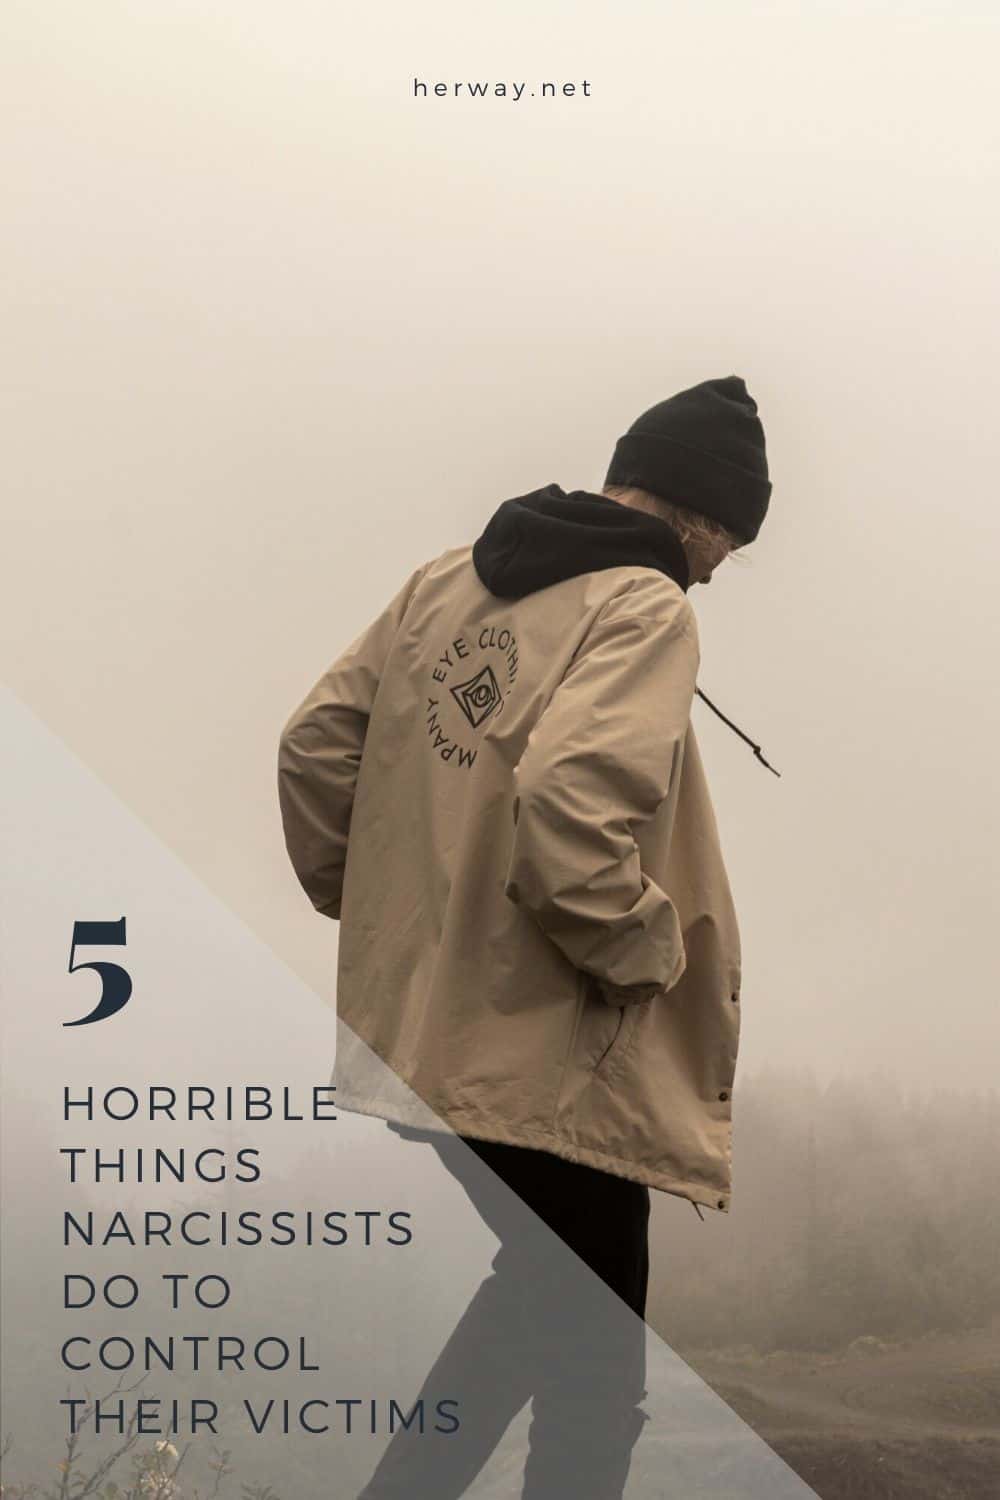 5 Horrible Things Narcissists Do To Control Their Victims